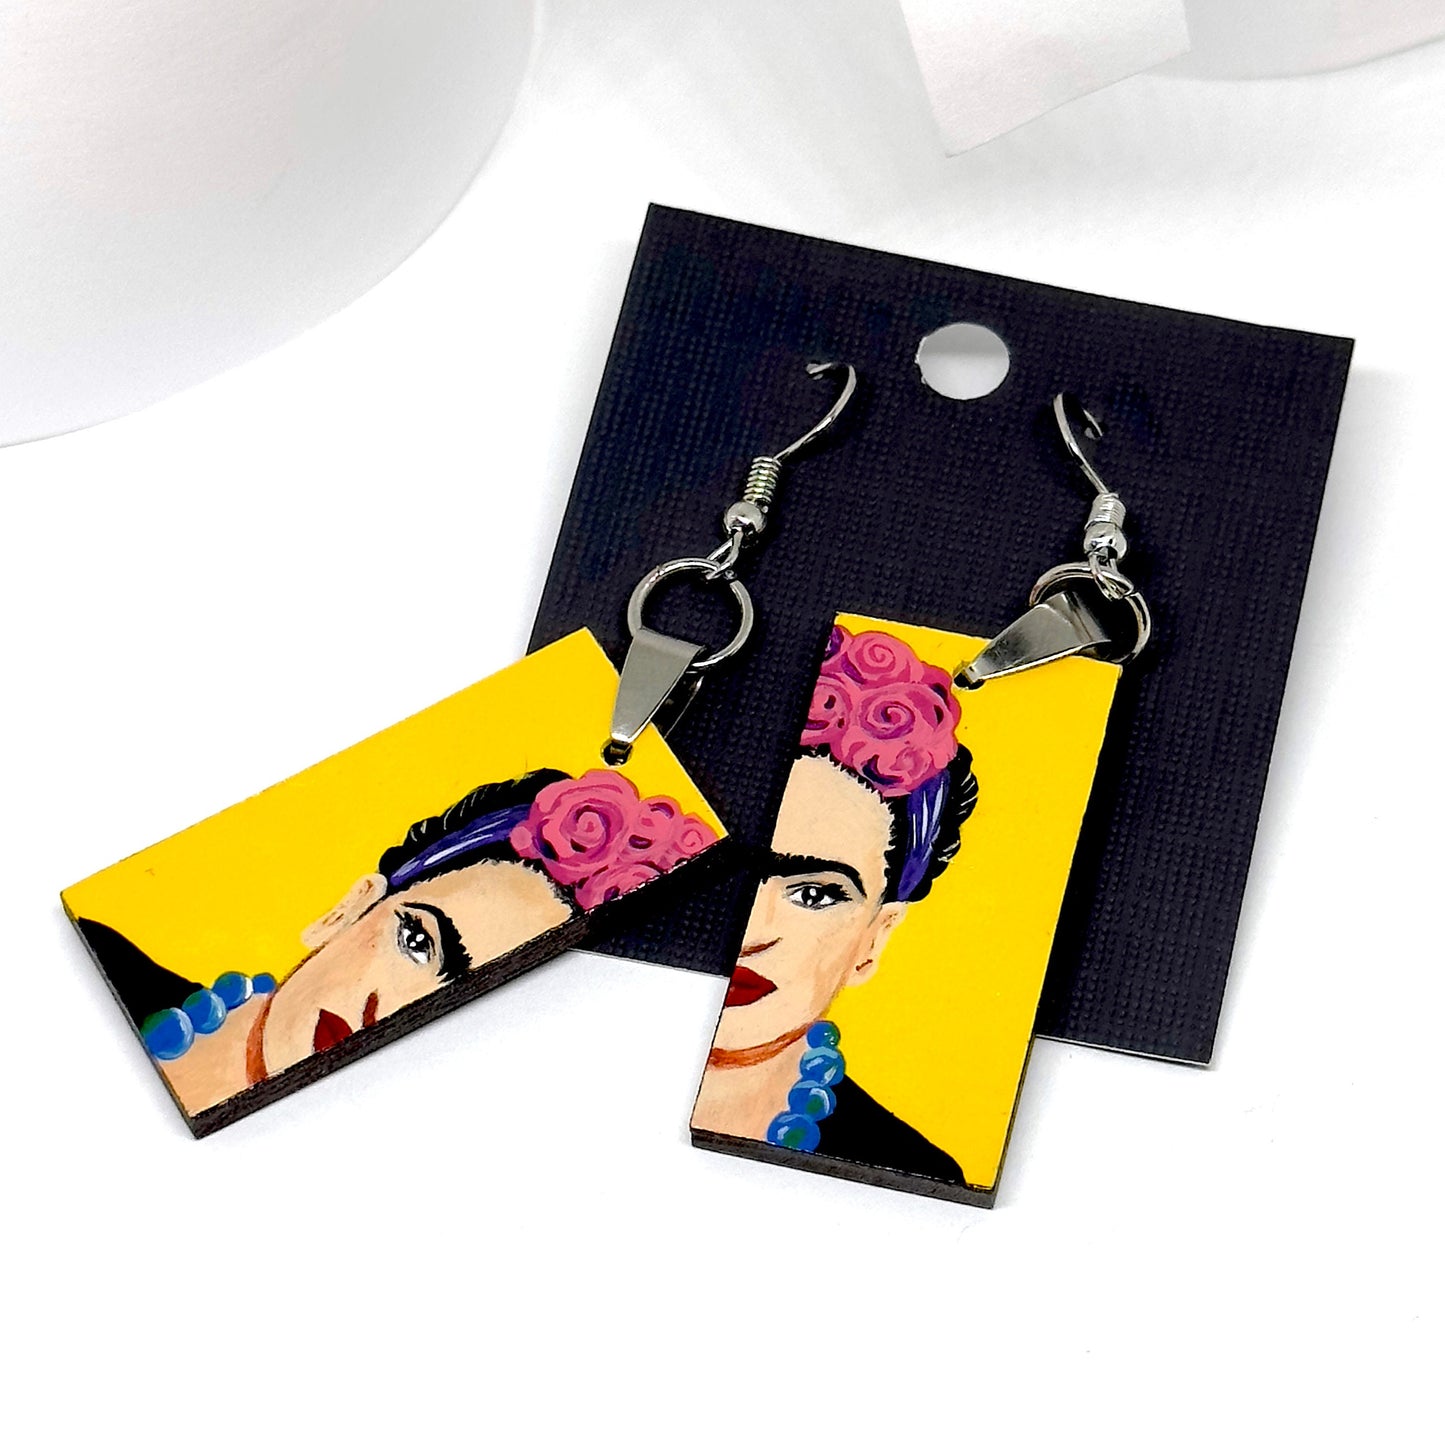 Glamorous Frida Earrings Girls Fashion Artwear Mexico Jewelry Hand Painted Wooden Drop Dangle Earrings Mexican Artist Portrait Aretes Mujer